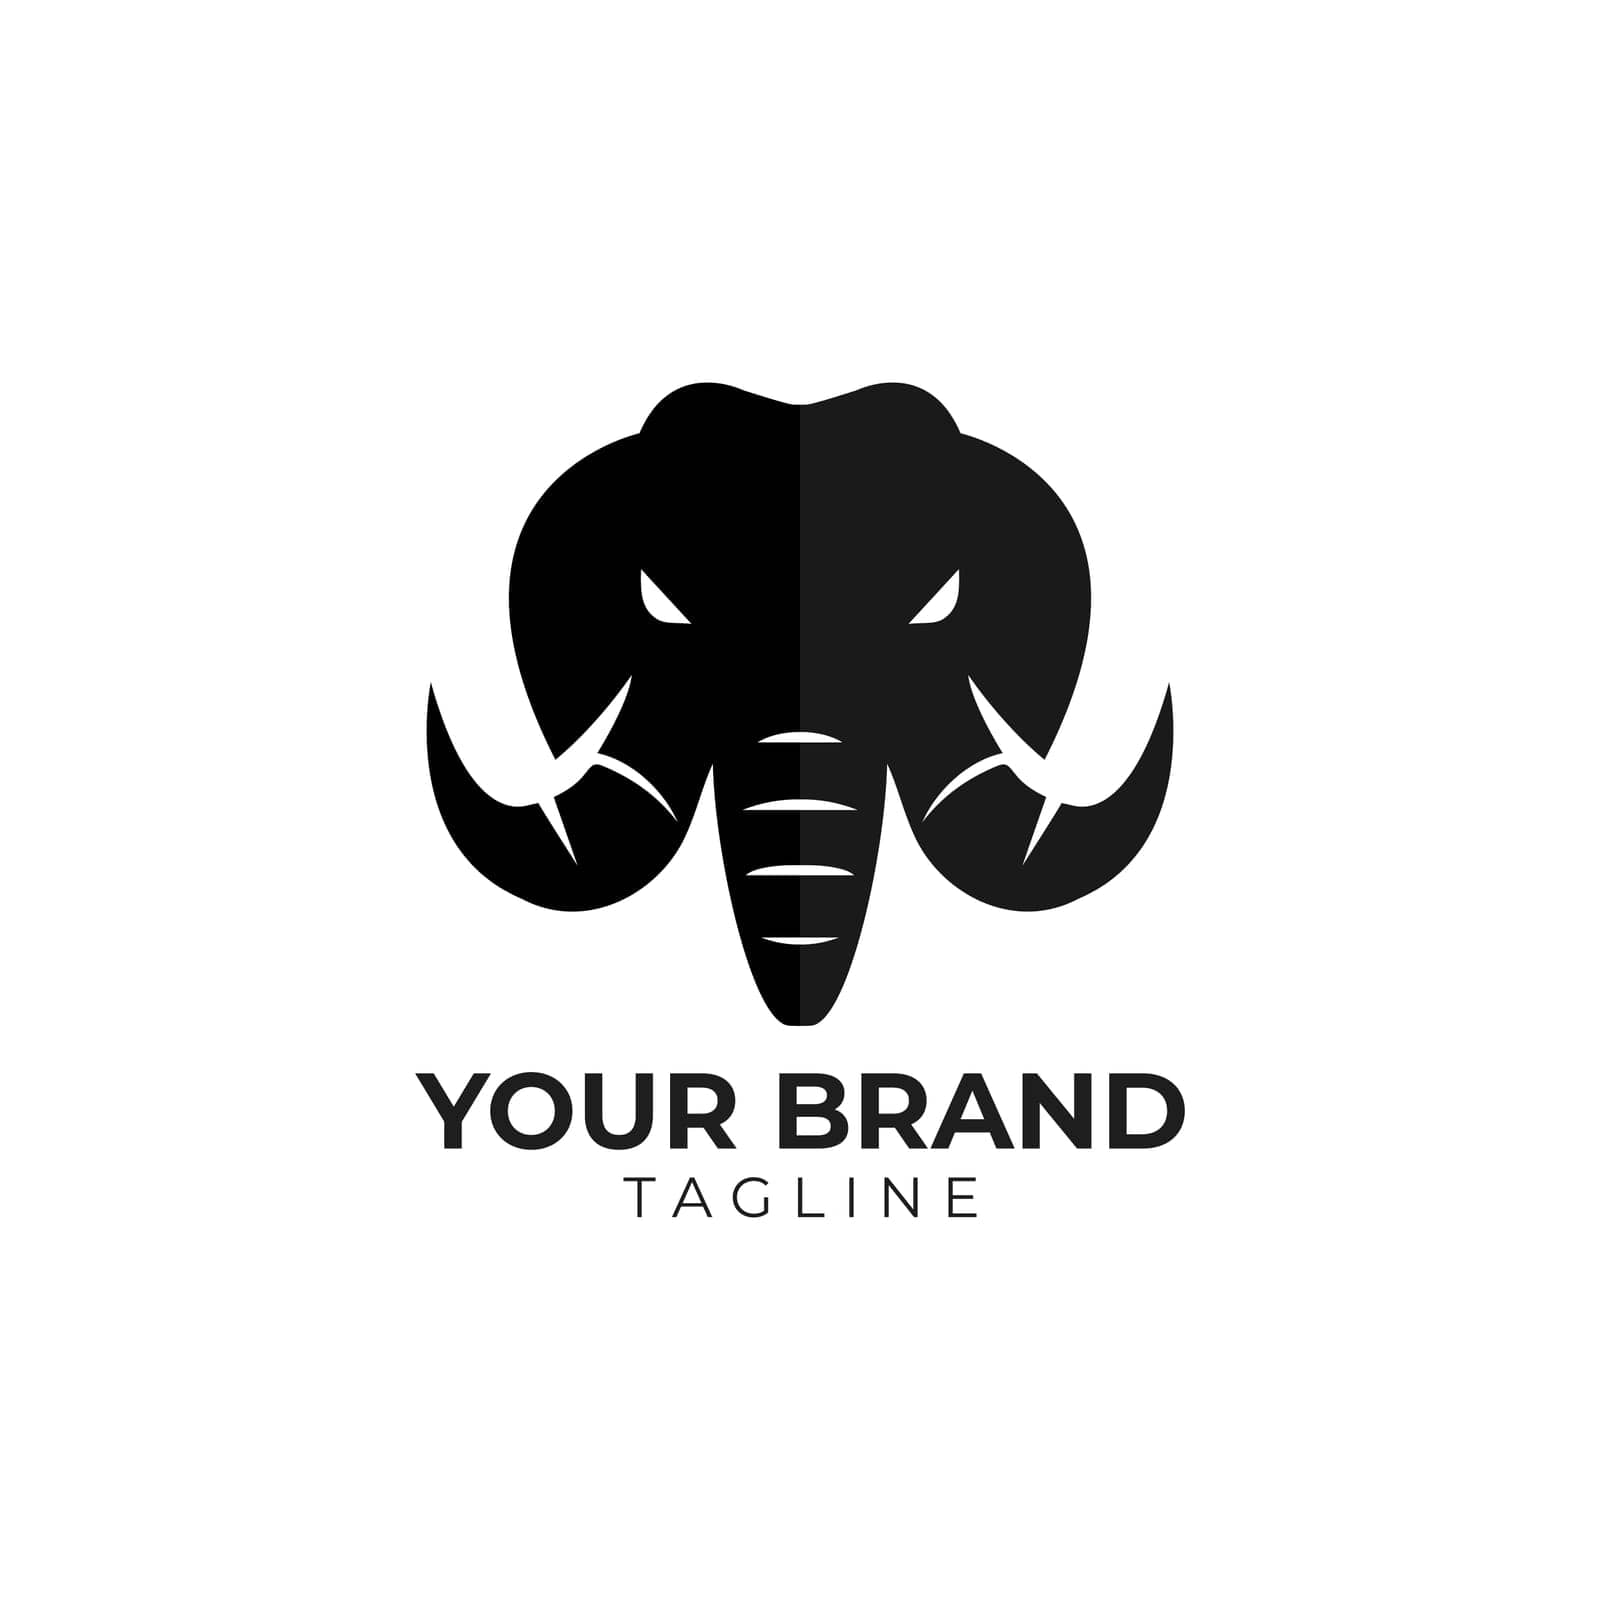 Elephant head with large tusks logo illustration.eps by Situmorang